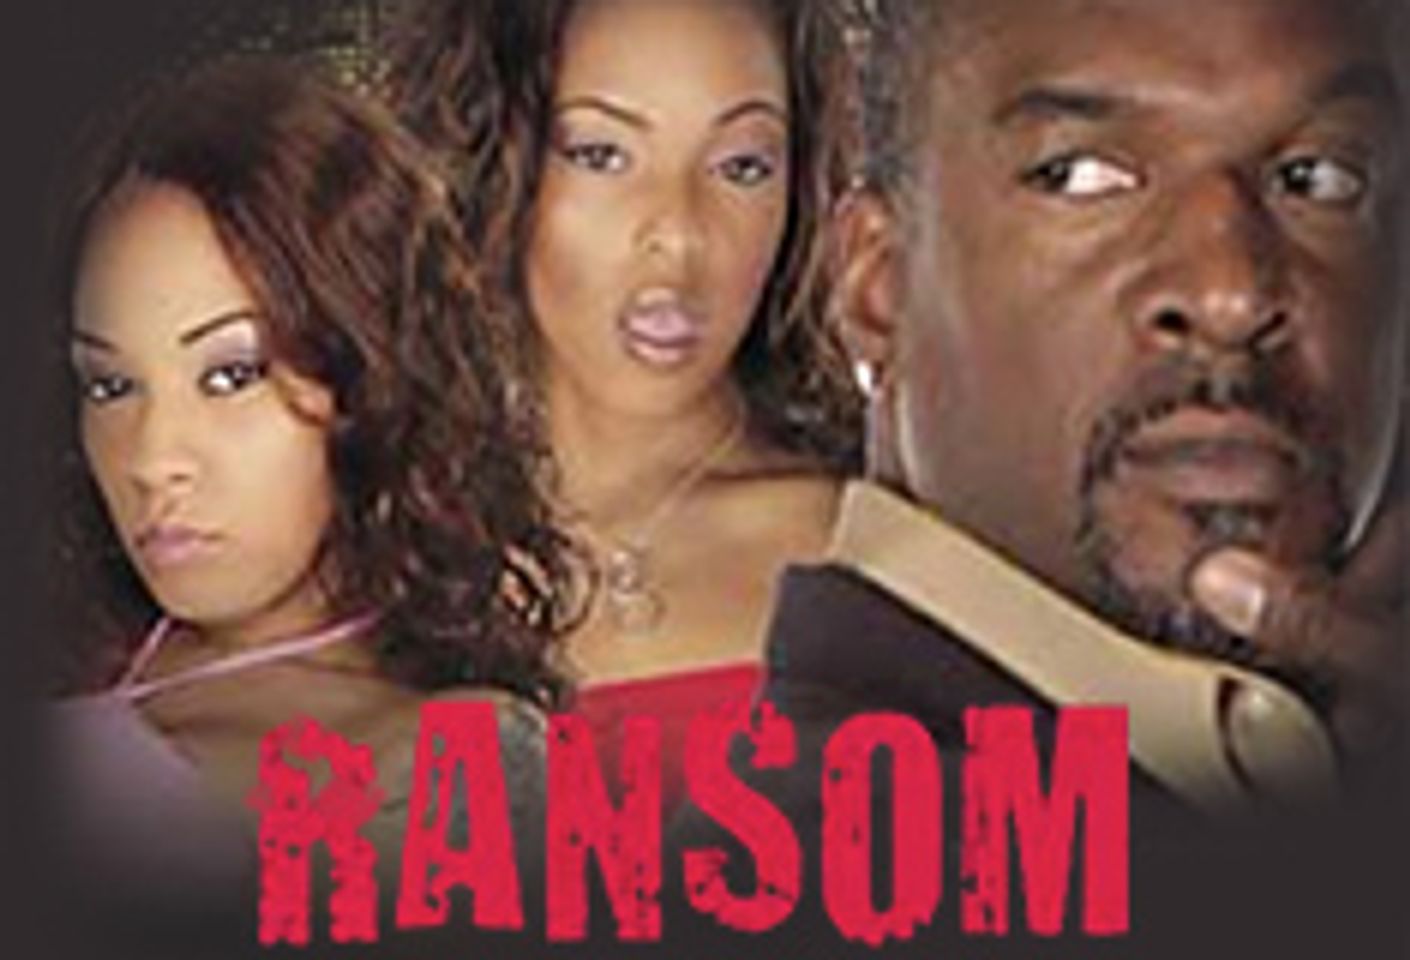 West Coast Goes Feature with Bishop's <i>Ransom</i>